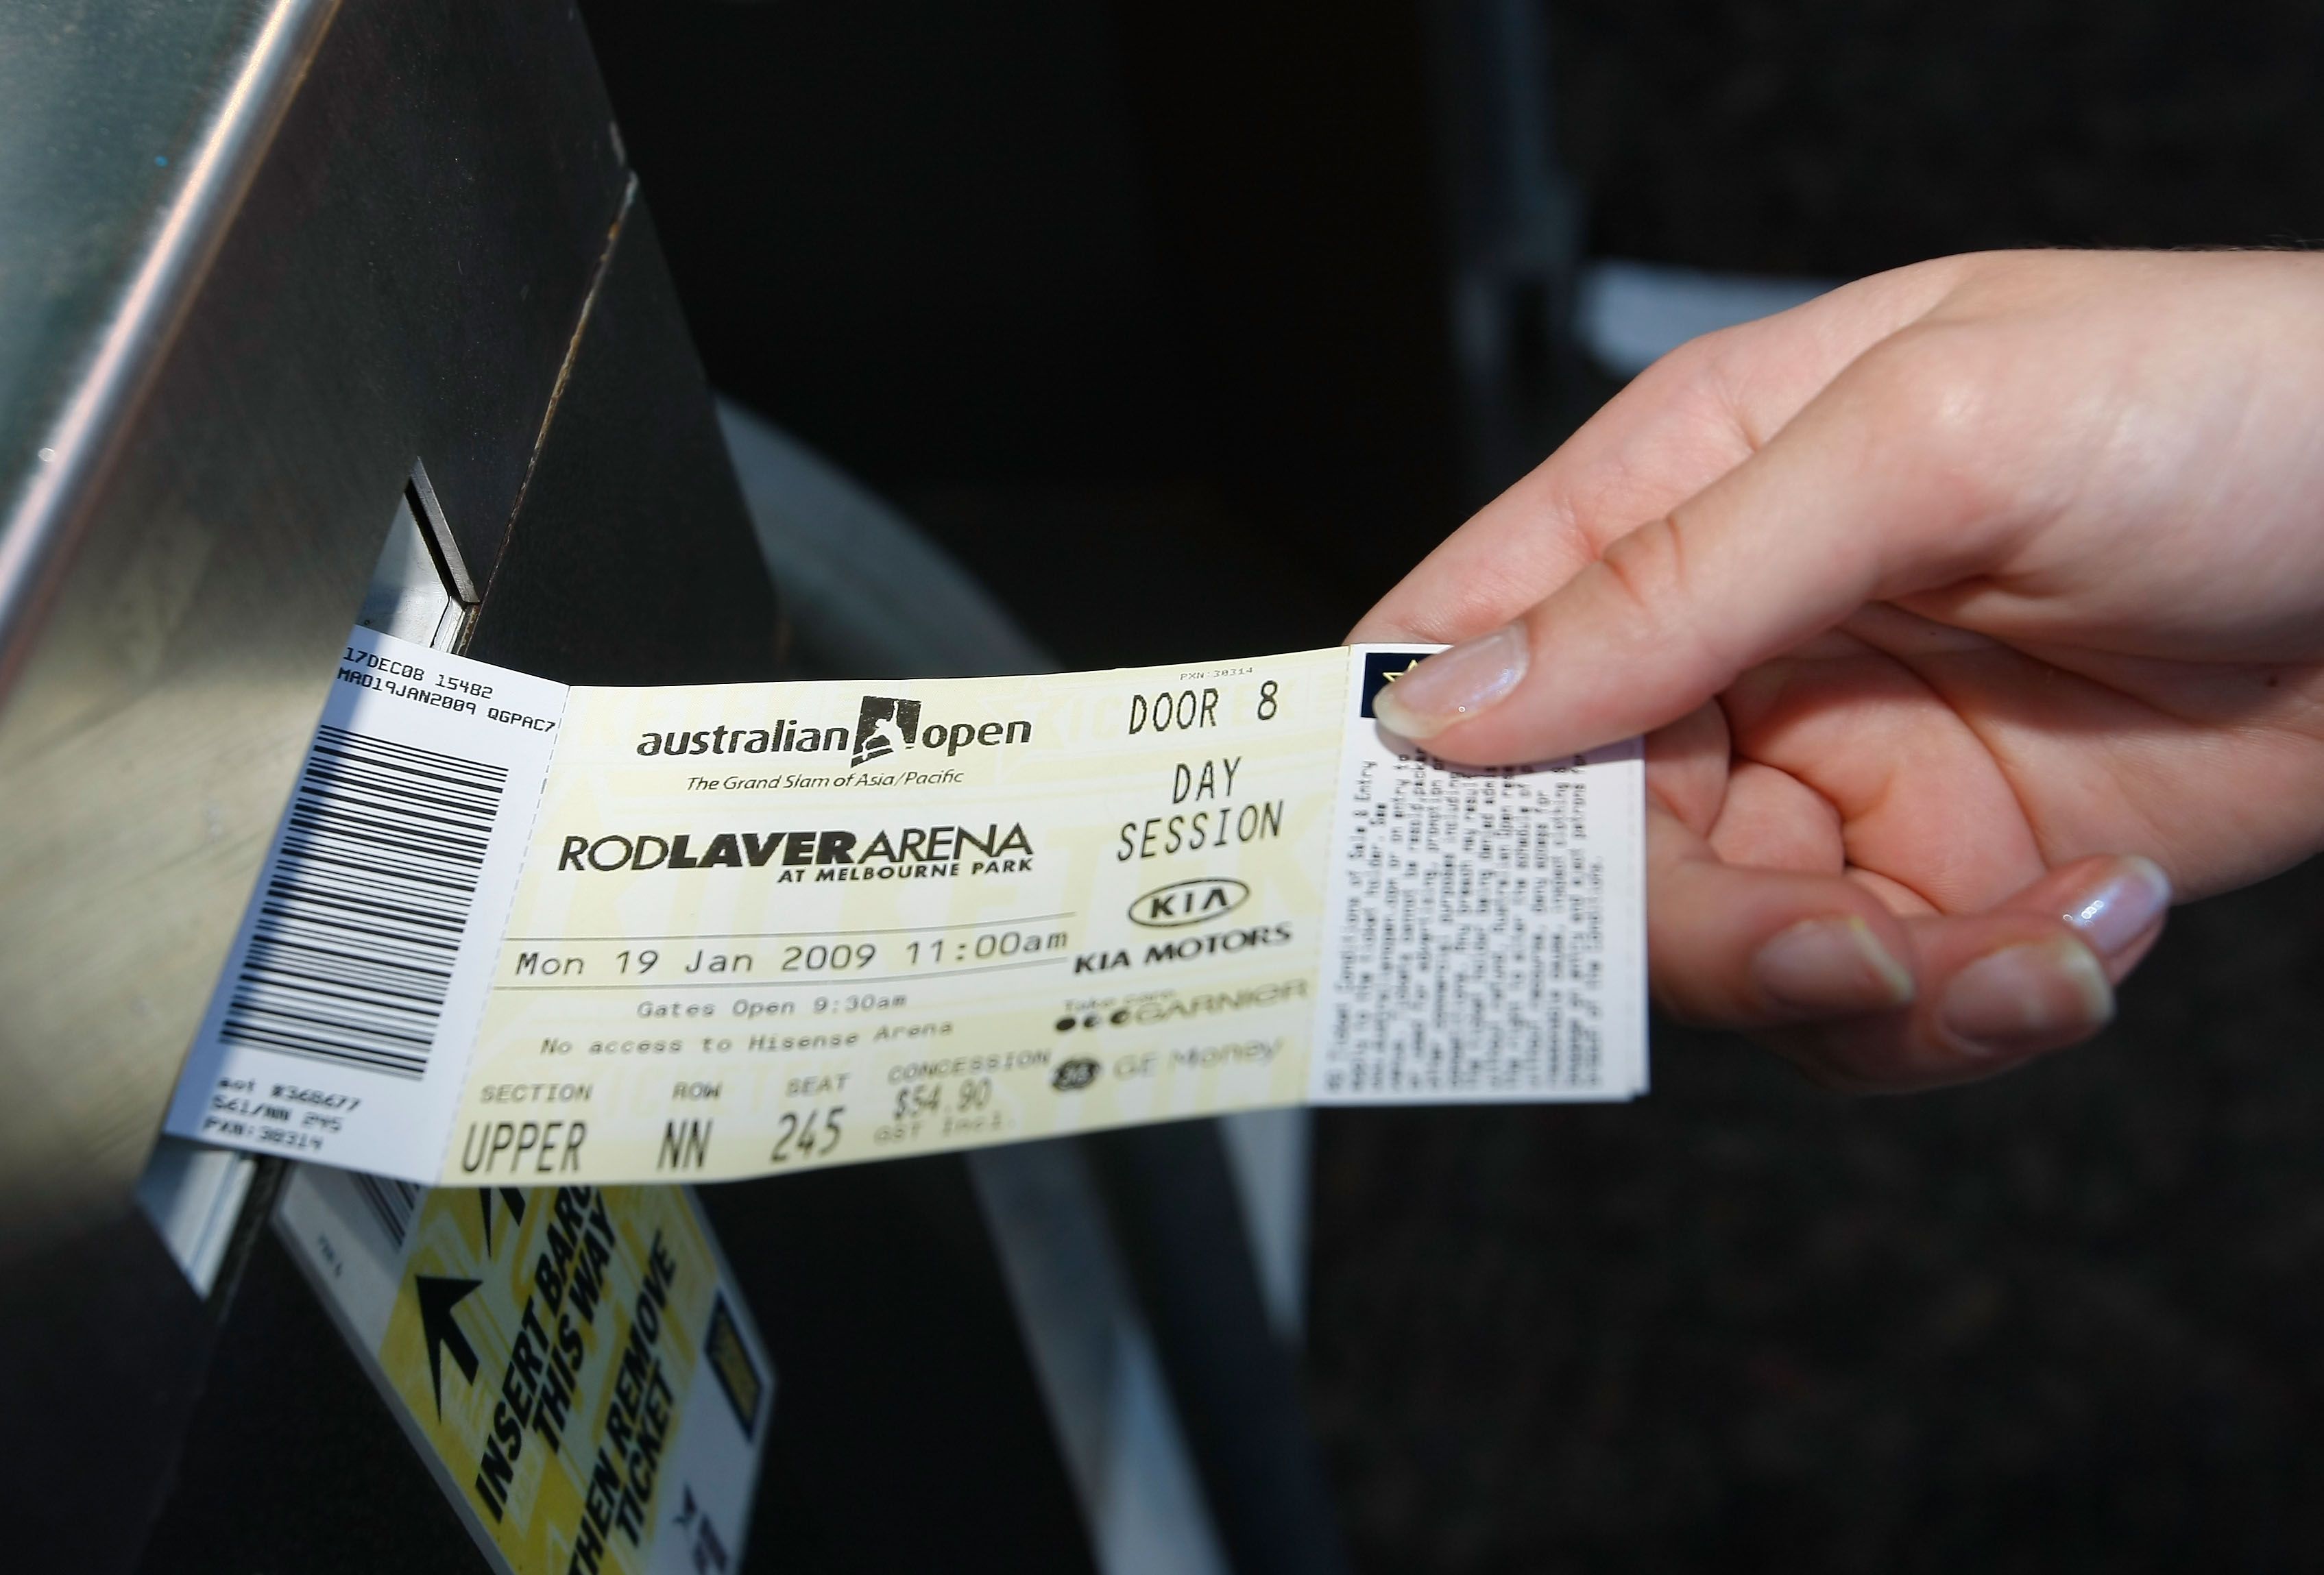 A fan has their ticket scanned in at an entry point during day one of the 2009 Australian Open at Melbourne Park on January 19, 2009 in Melbourne, Australia.